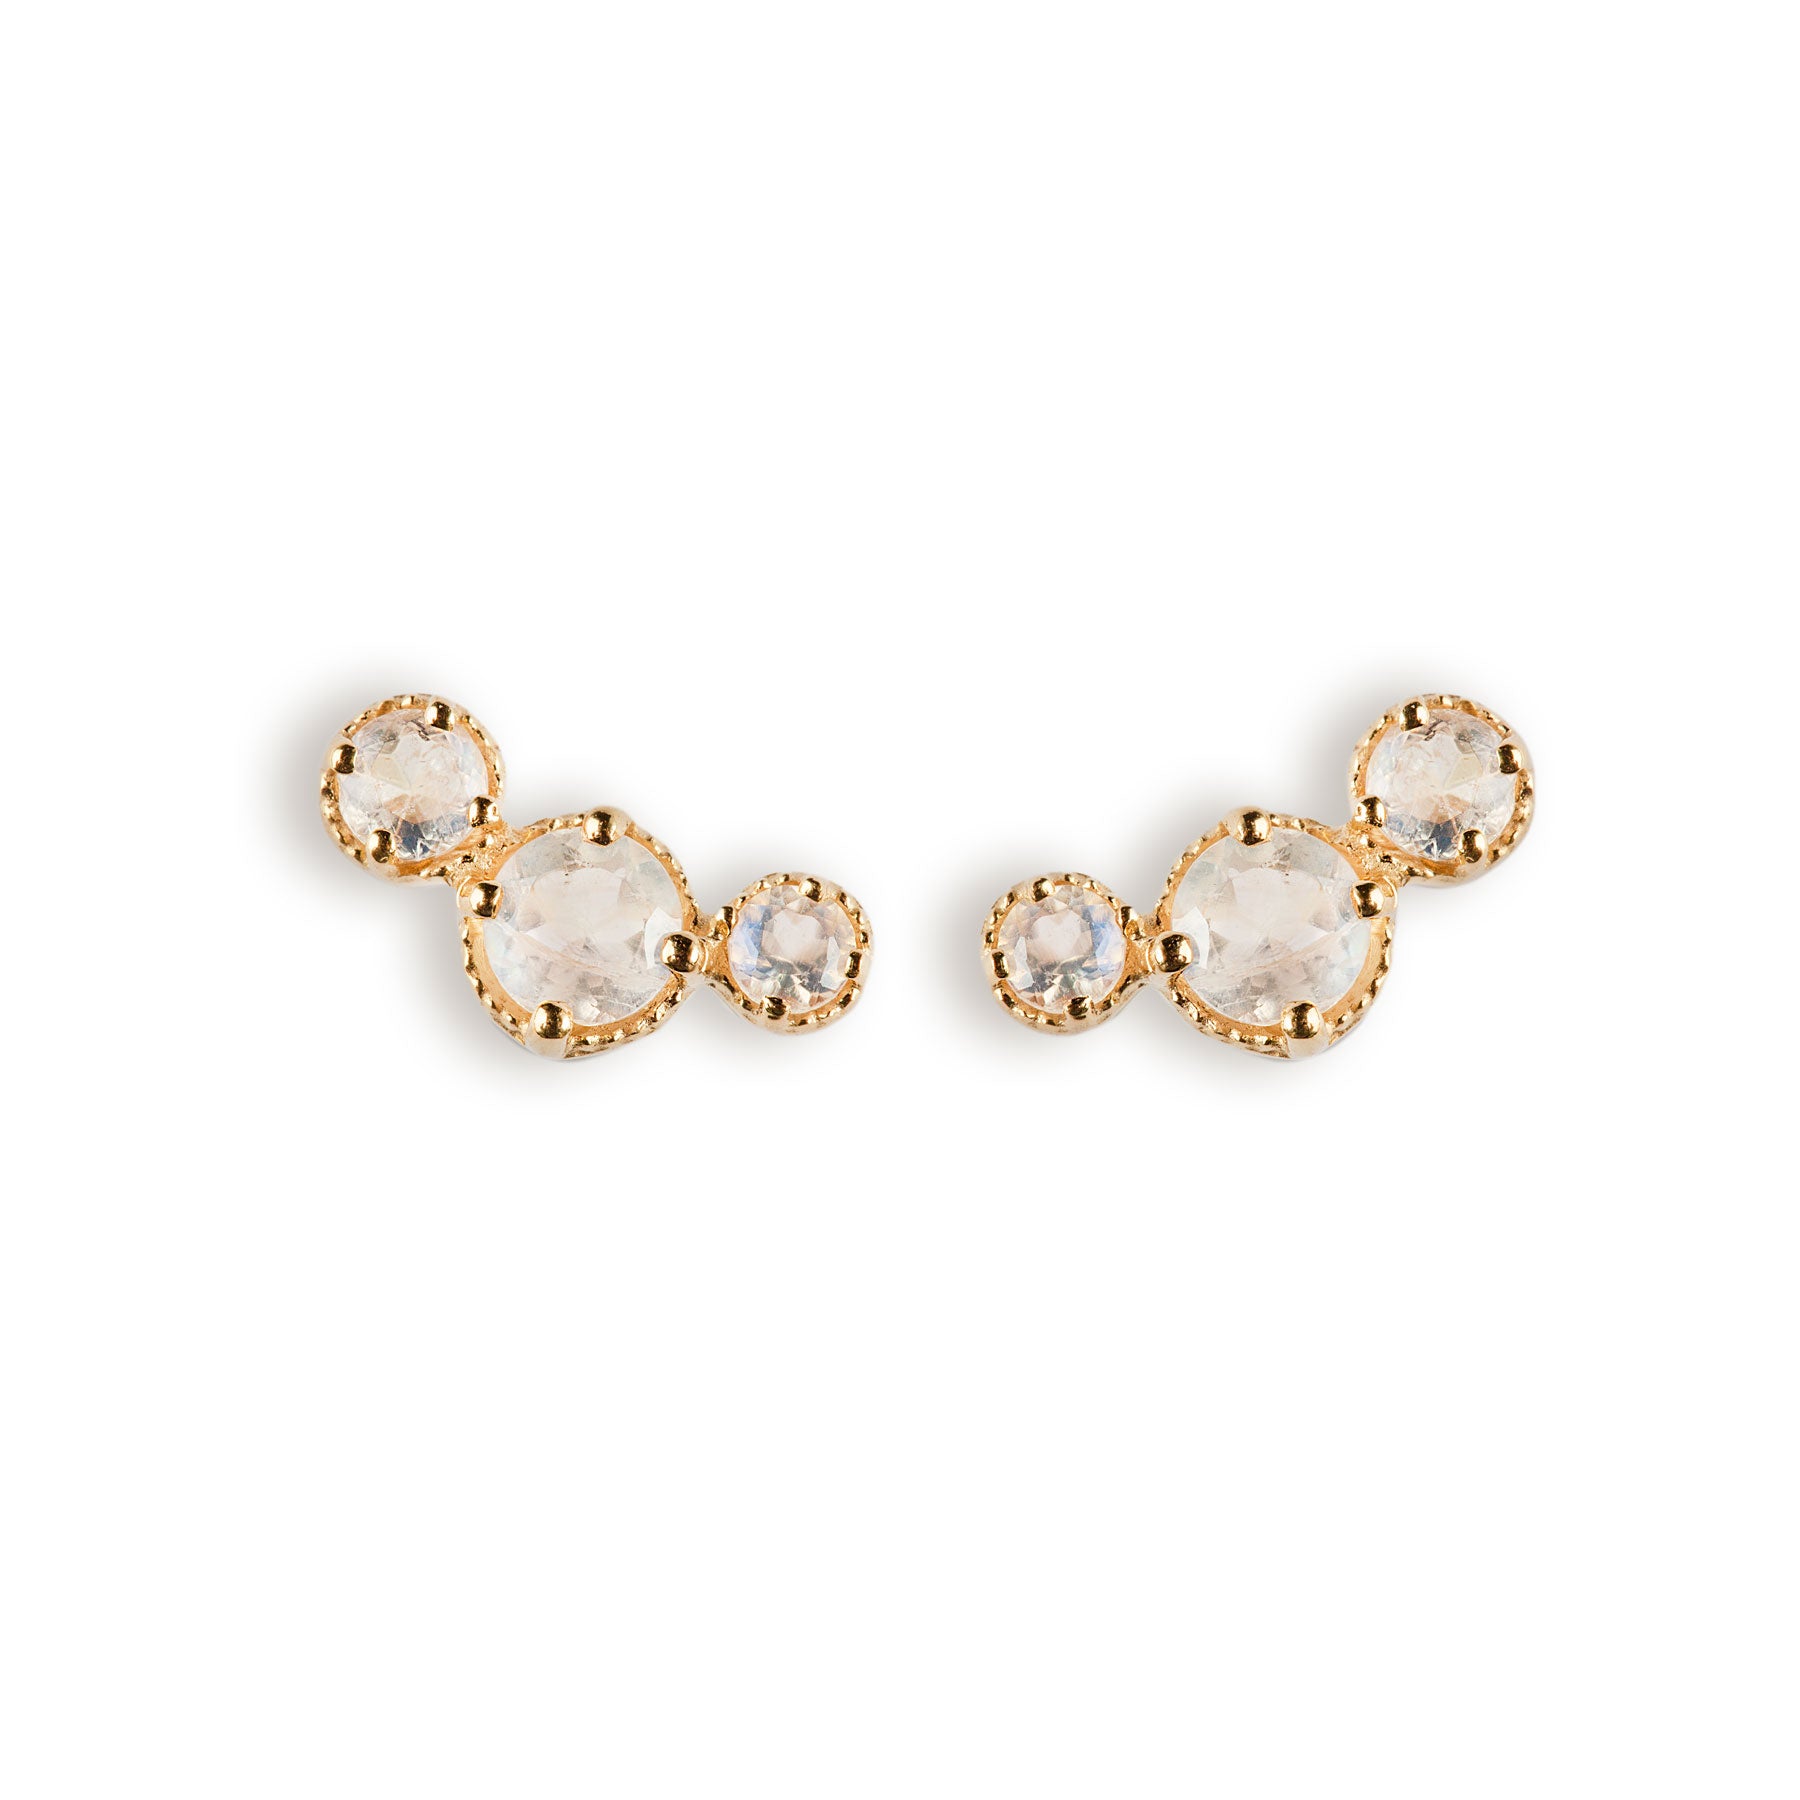 MOONSTONE EARRINGS SET IN 925 SILVER GOLD PLATED